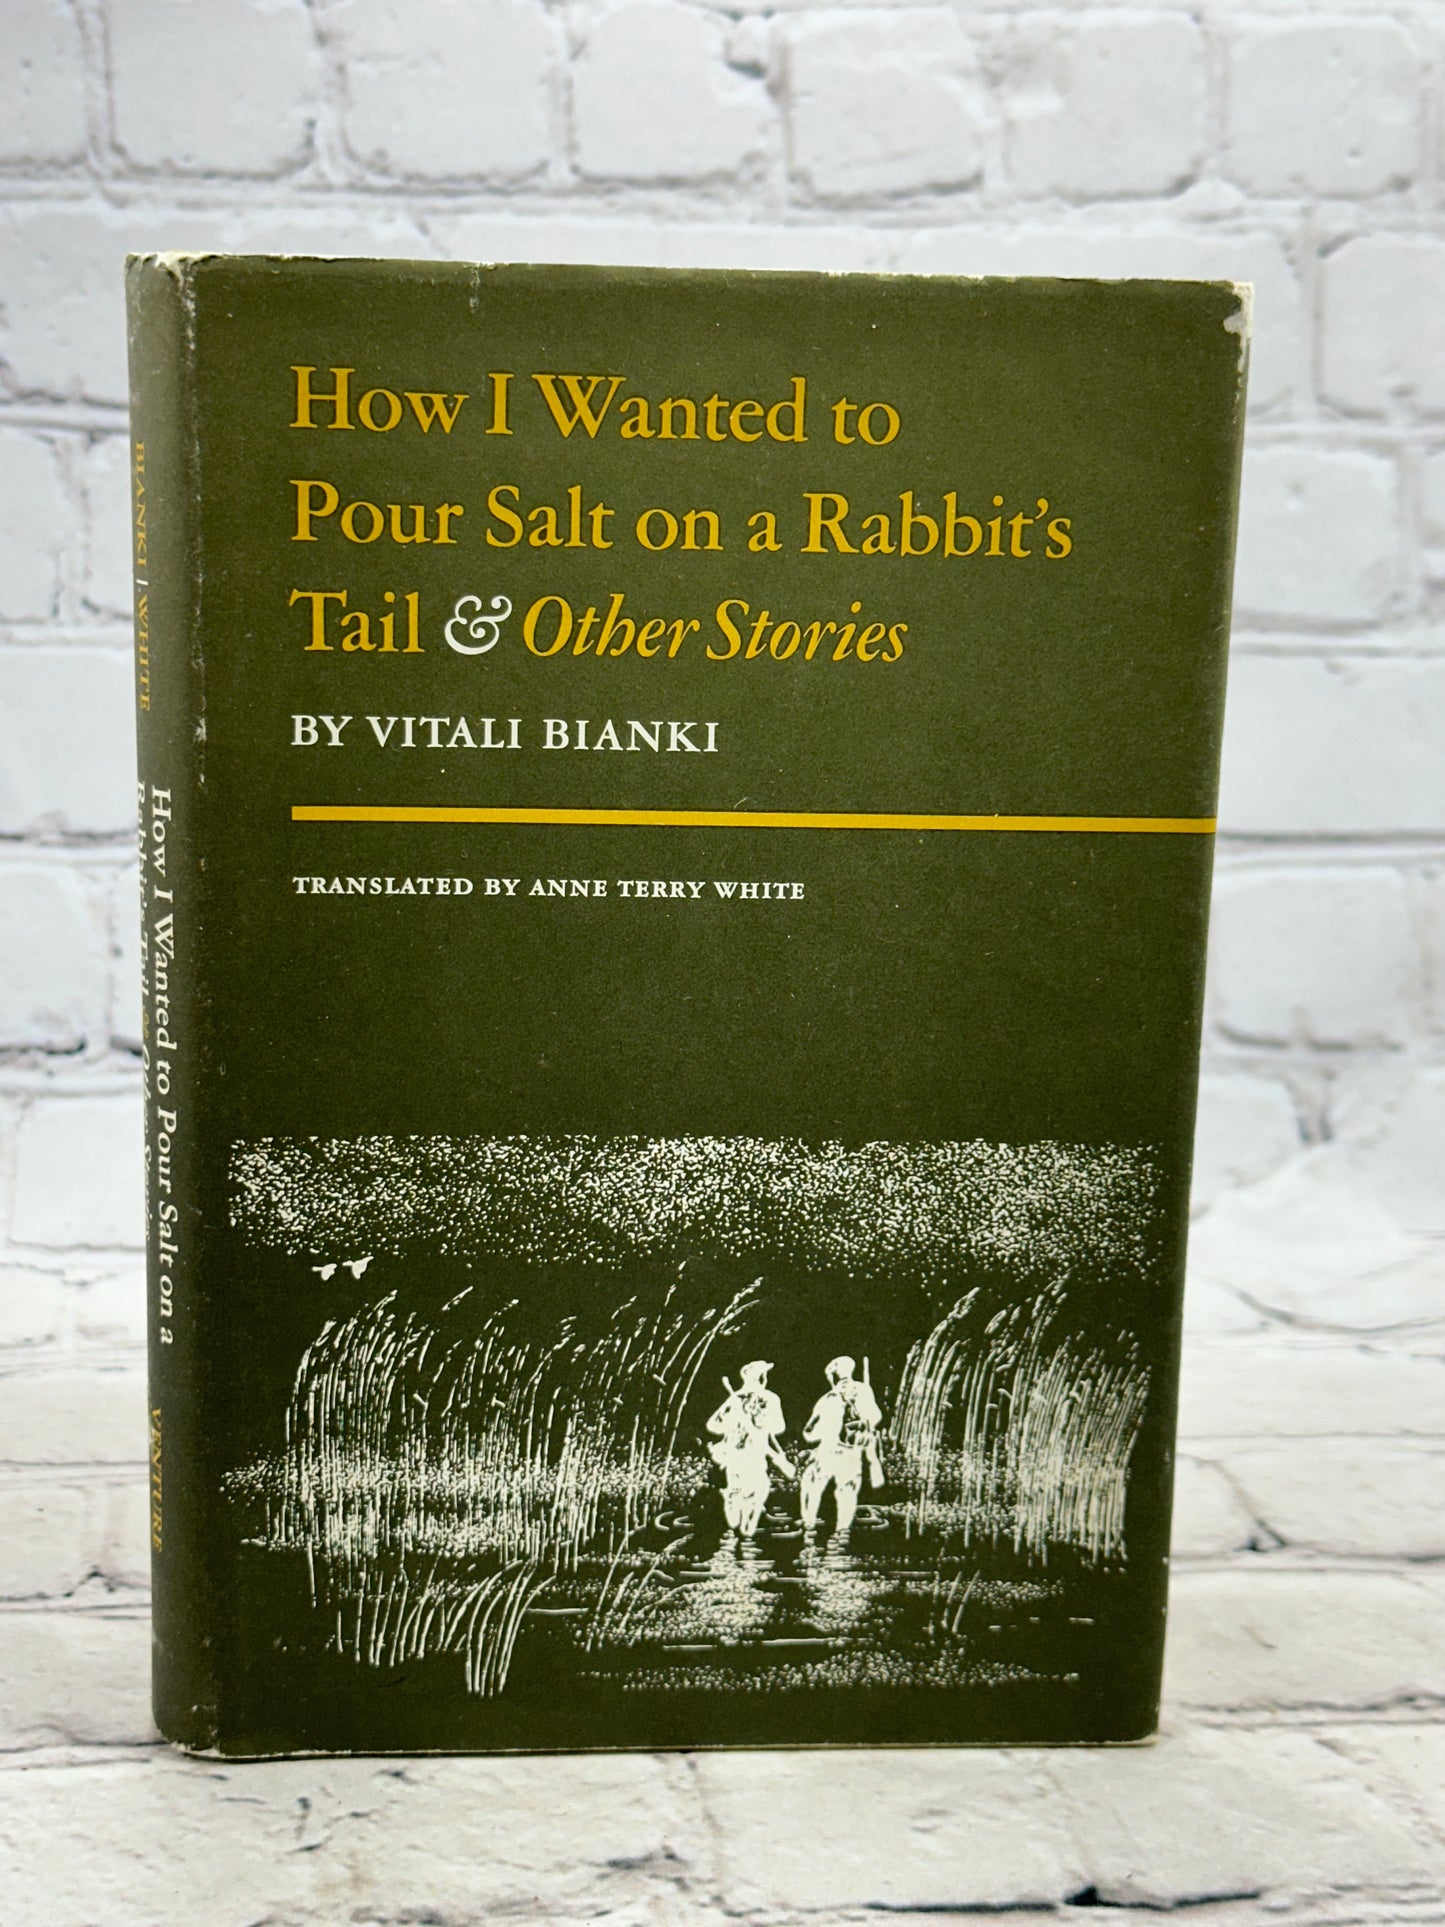 How I Wanted To Pour Salt On A Rabbit's Tail And Other Stories V. Bianki [1967]